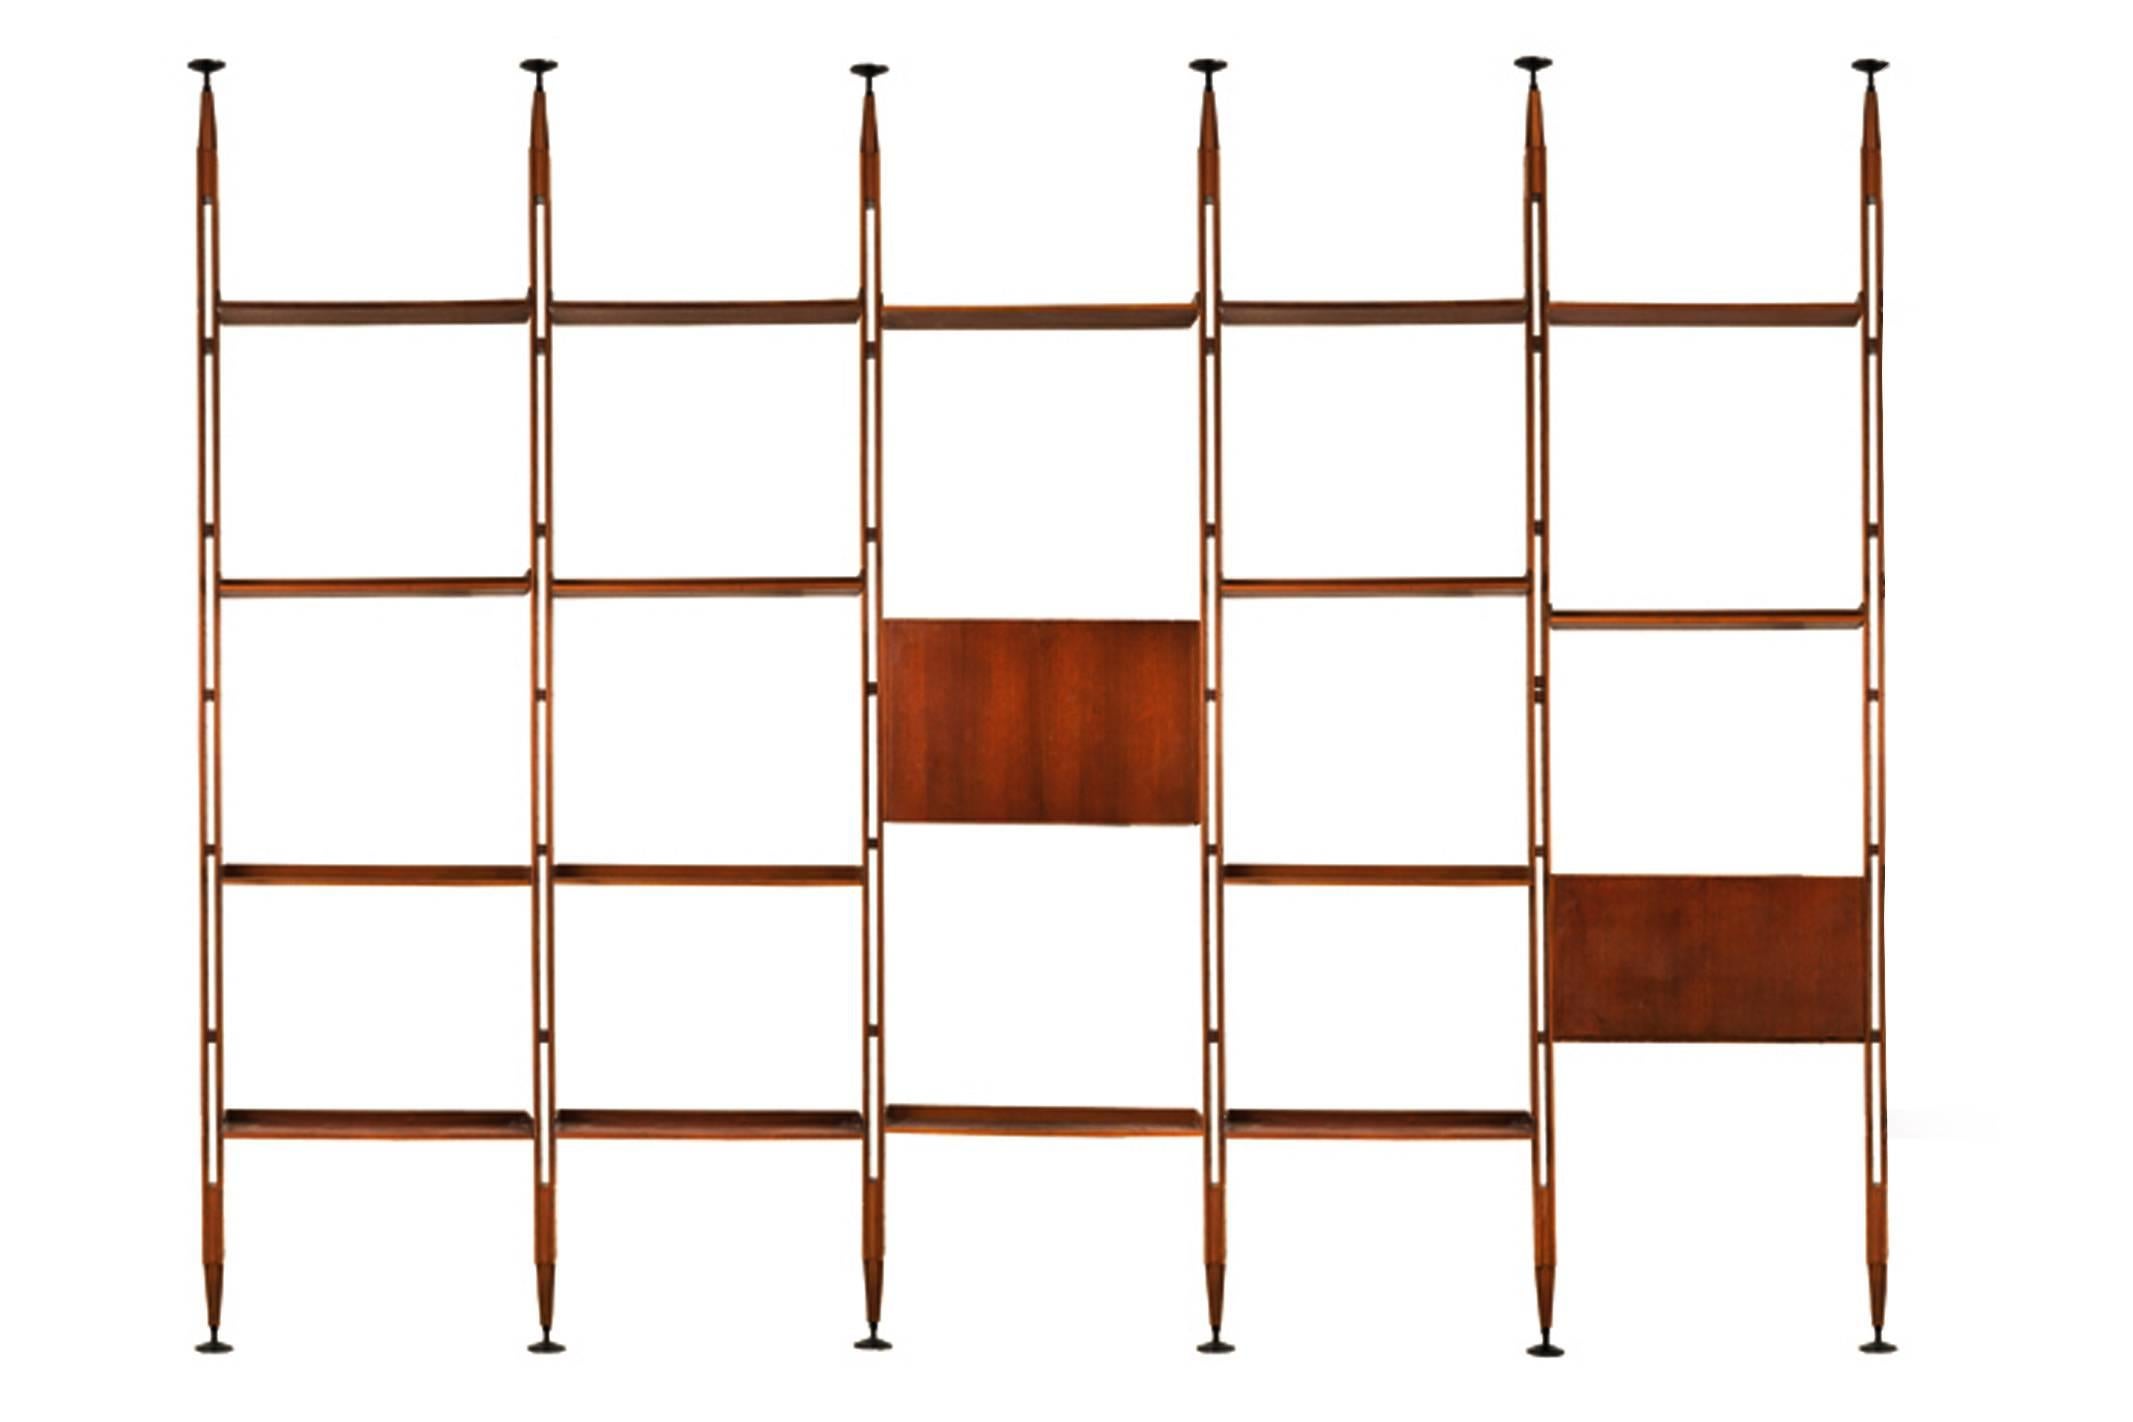 Bookcase structure composed of rosewood with black-painted aluminum brackets on top and bottom, supporting two cabinets and adjustable shelves. Literature: Giuliana Gramigna’s Repertorio del Design Italiano 1950-2000, Vol. I, Milano, 1985, model